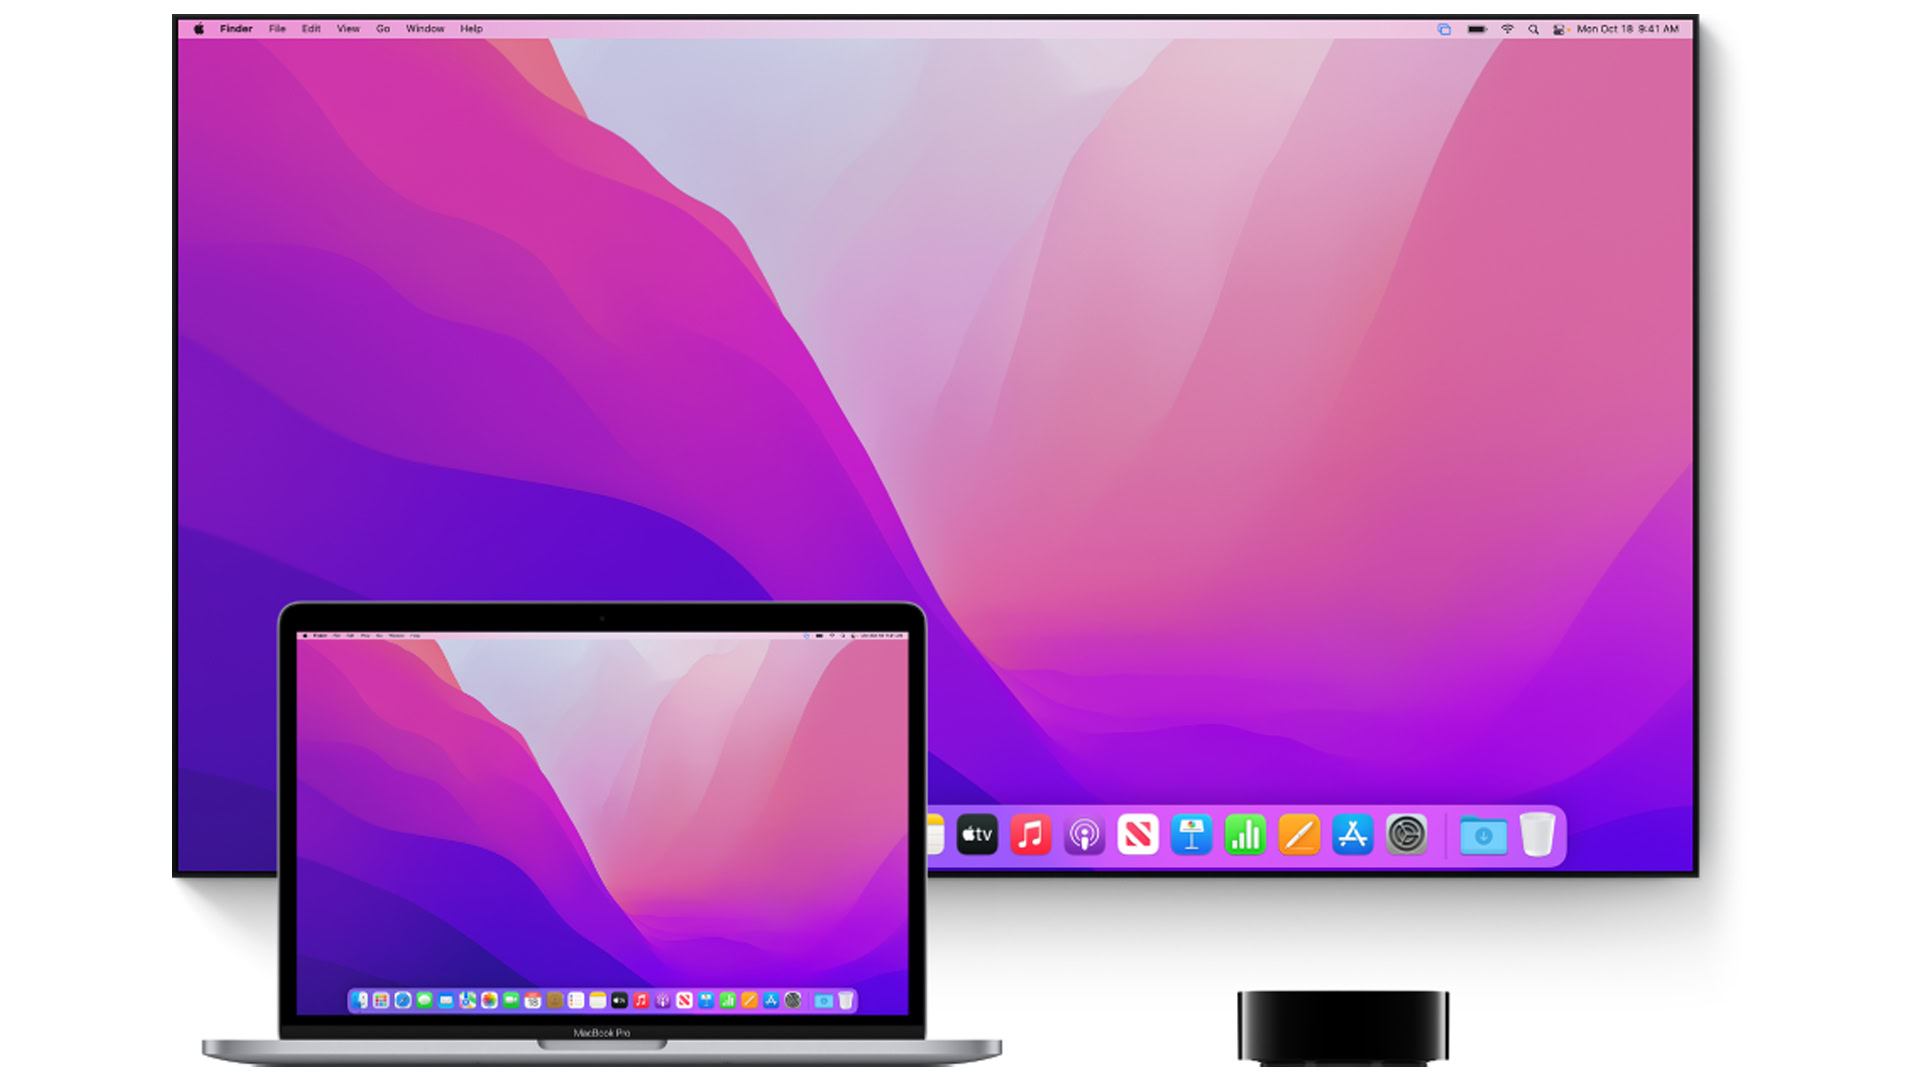 AirPlay Mirroring from your Mac